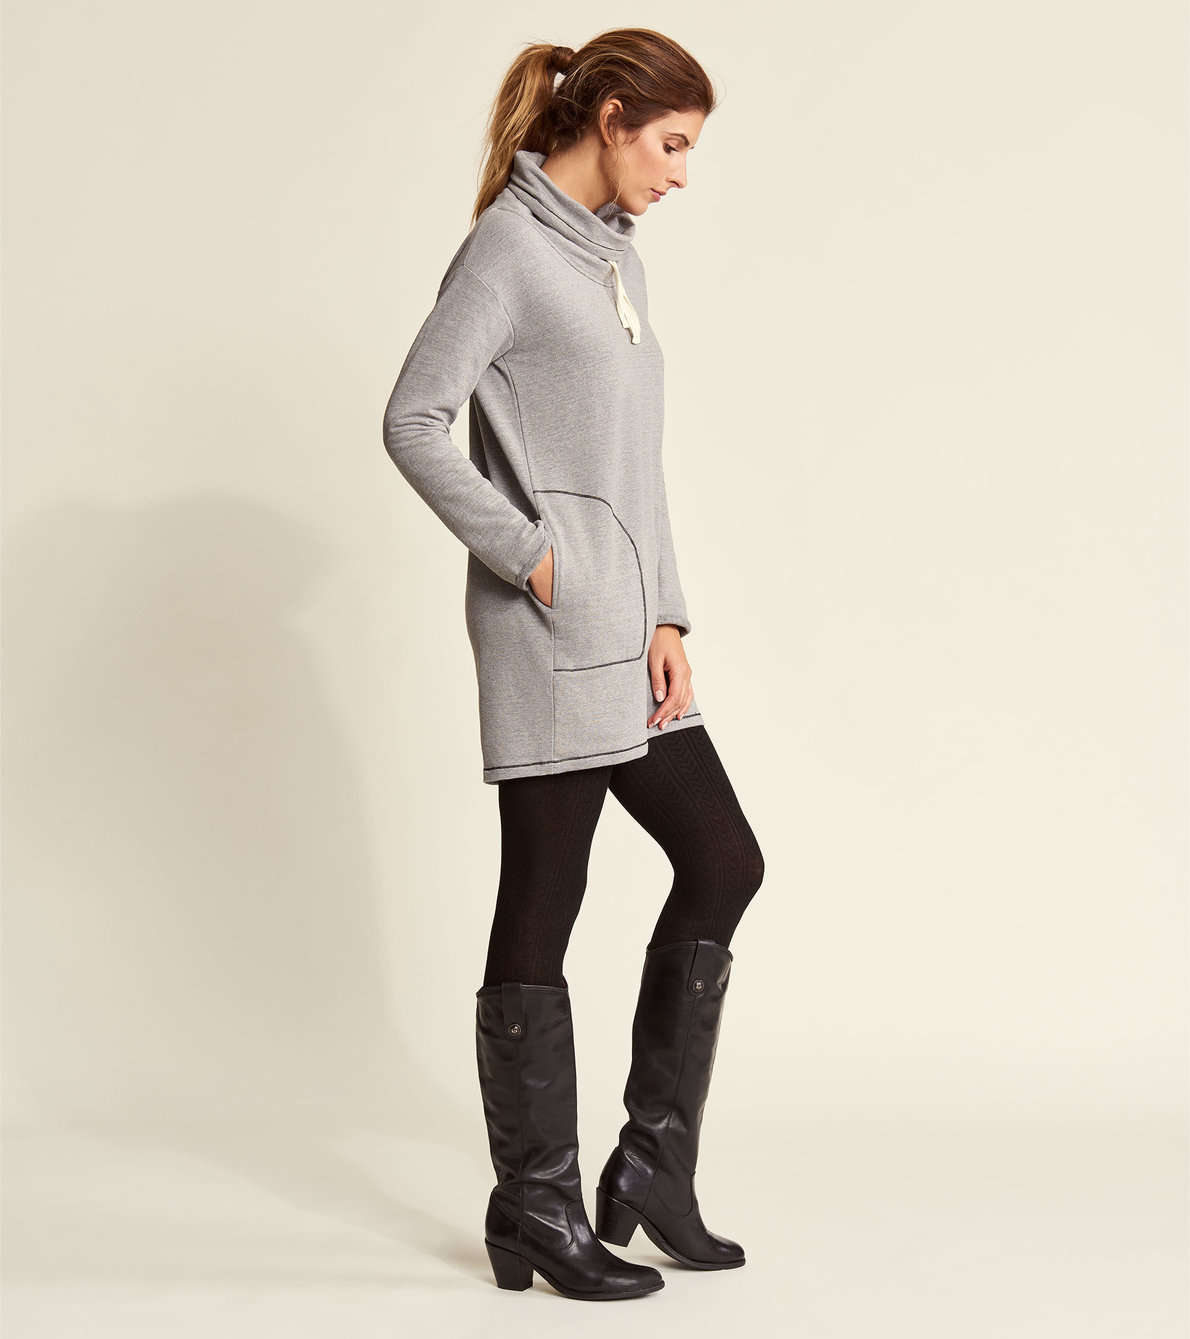 View larger image of Funnel Neck Tunic - Salt and Pepper Charcoal